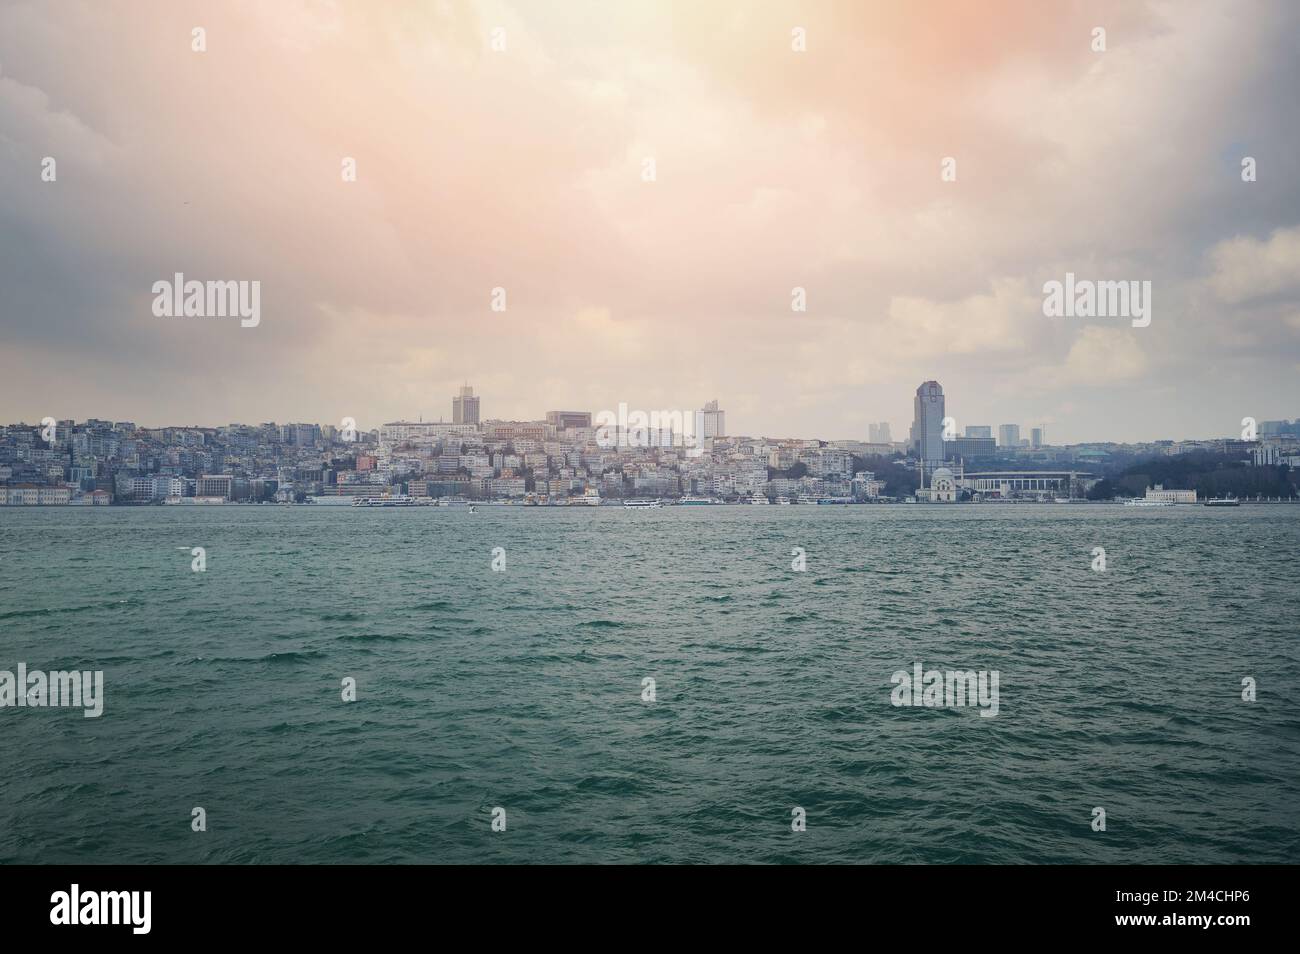 Panorama of Istanbul city europe side with shore side view Stock Photo